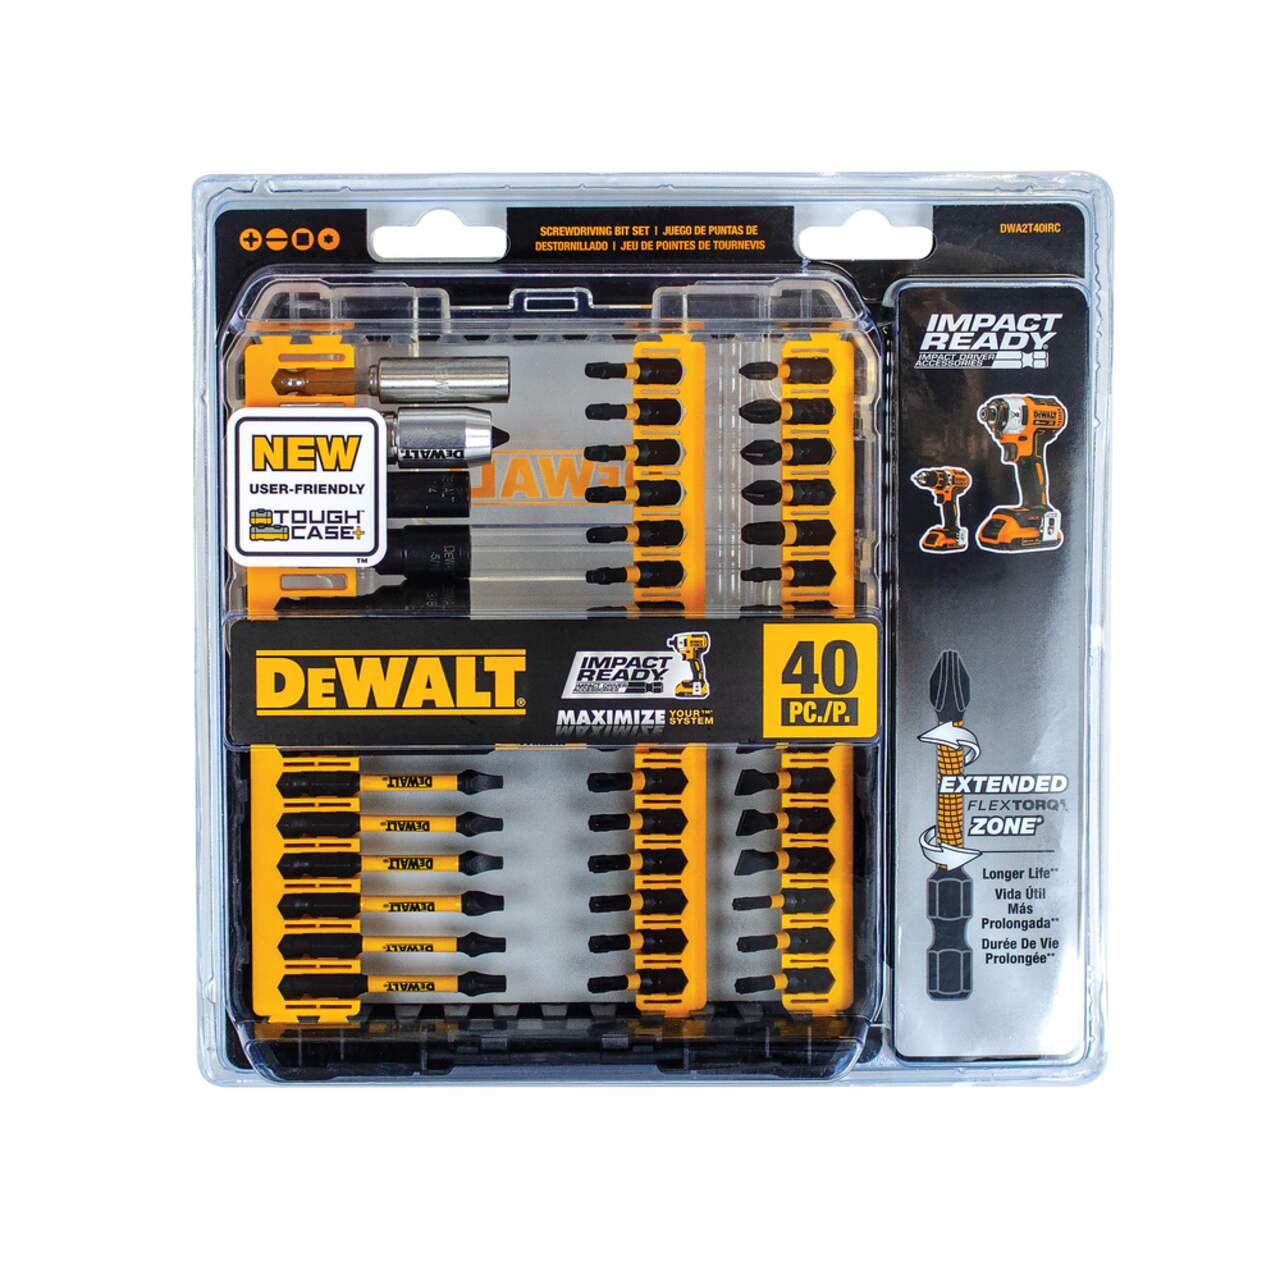 https://media-www.canadiantire.ca/product/fixing/tools/power-tool-accessories/0543903/dewalt-40-pc-impact-ready-torsion-screwdriving-set-7e8c998b-b6e0-4d23-b3cf-88afe1627be8.png?imdensity=1&imwidth=640&impolicy=mZoom